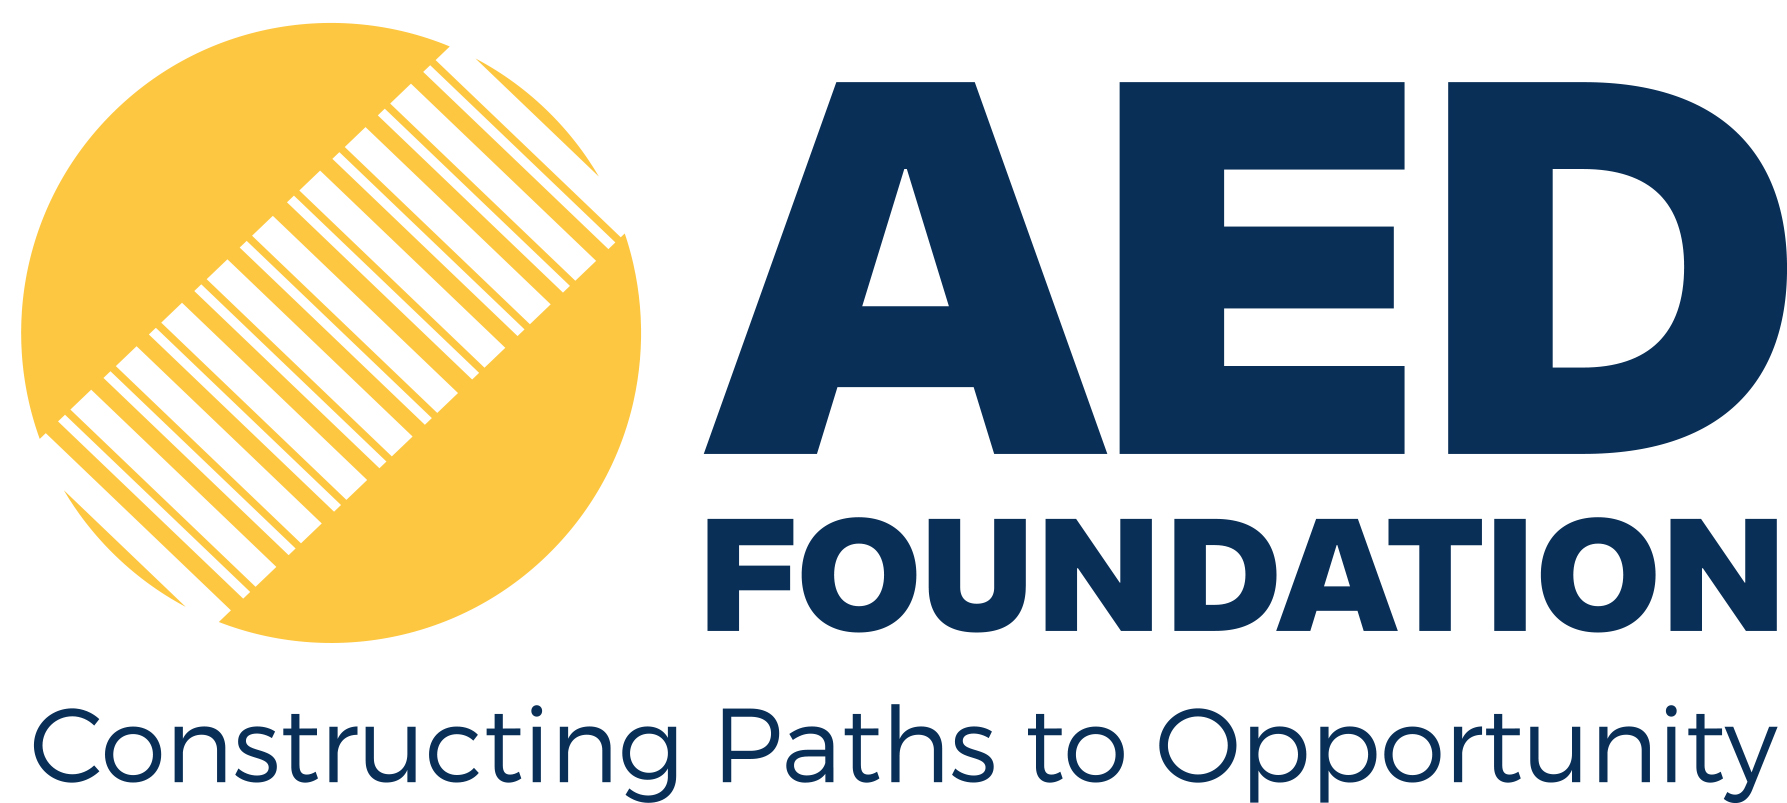 The AED Foundation logo